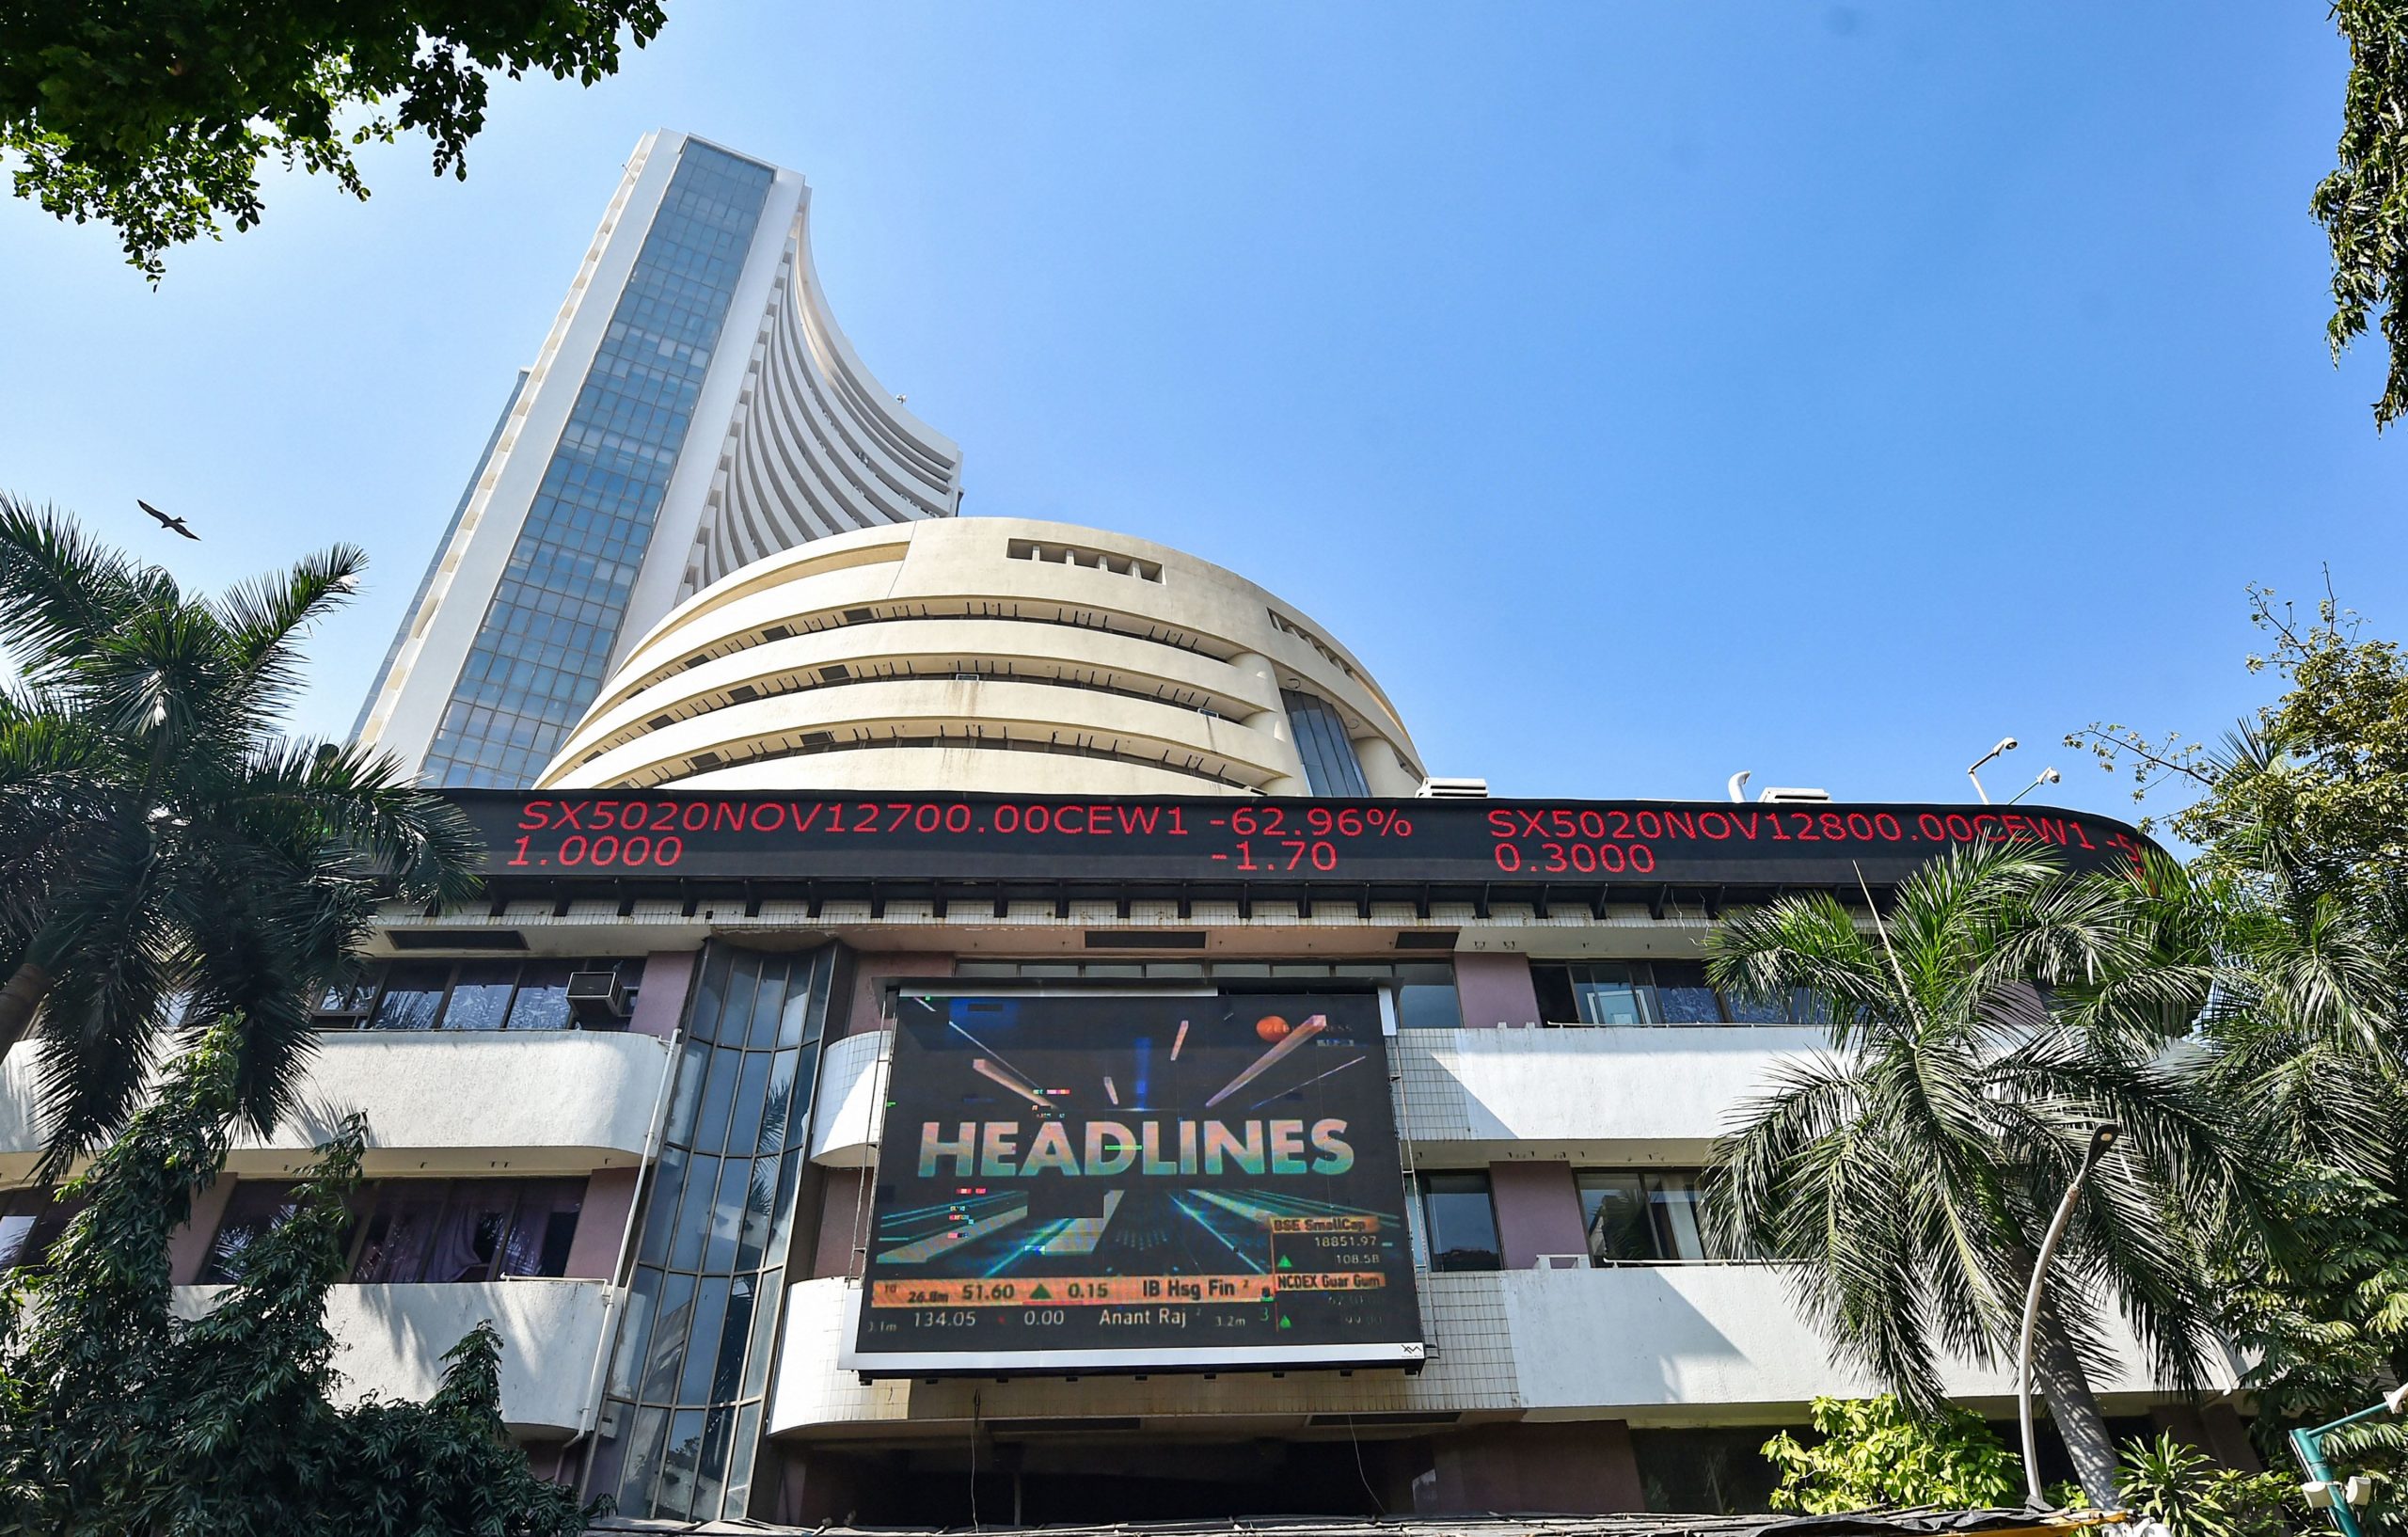 Trending Stocks: Coal India, NTPC, Infosys, BSE and others in news today